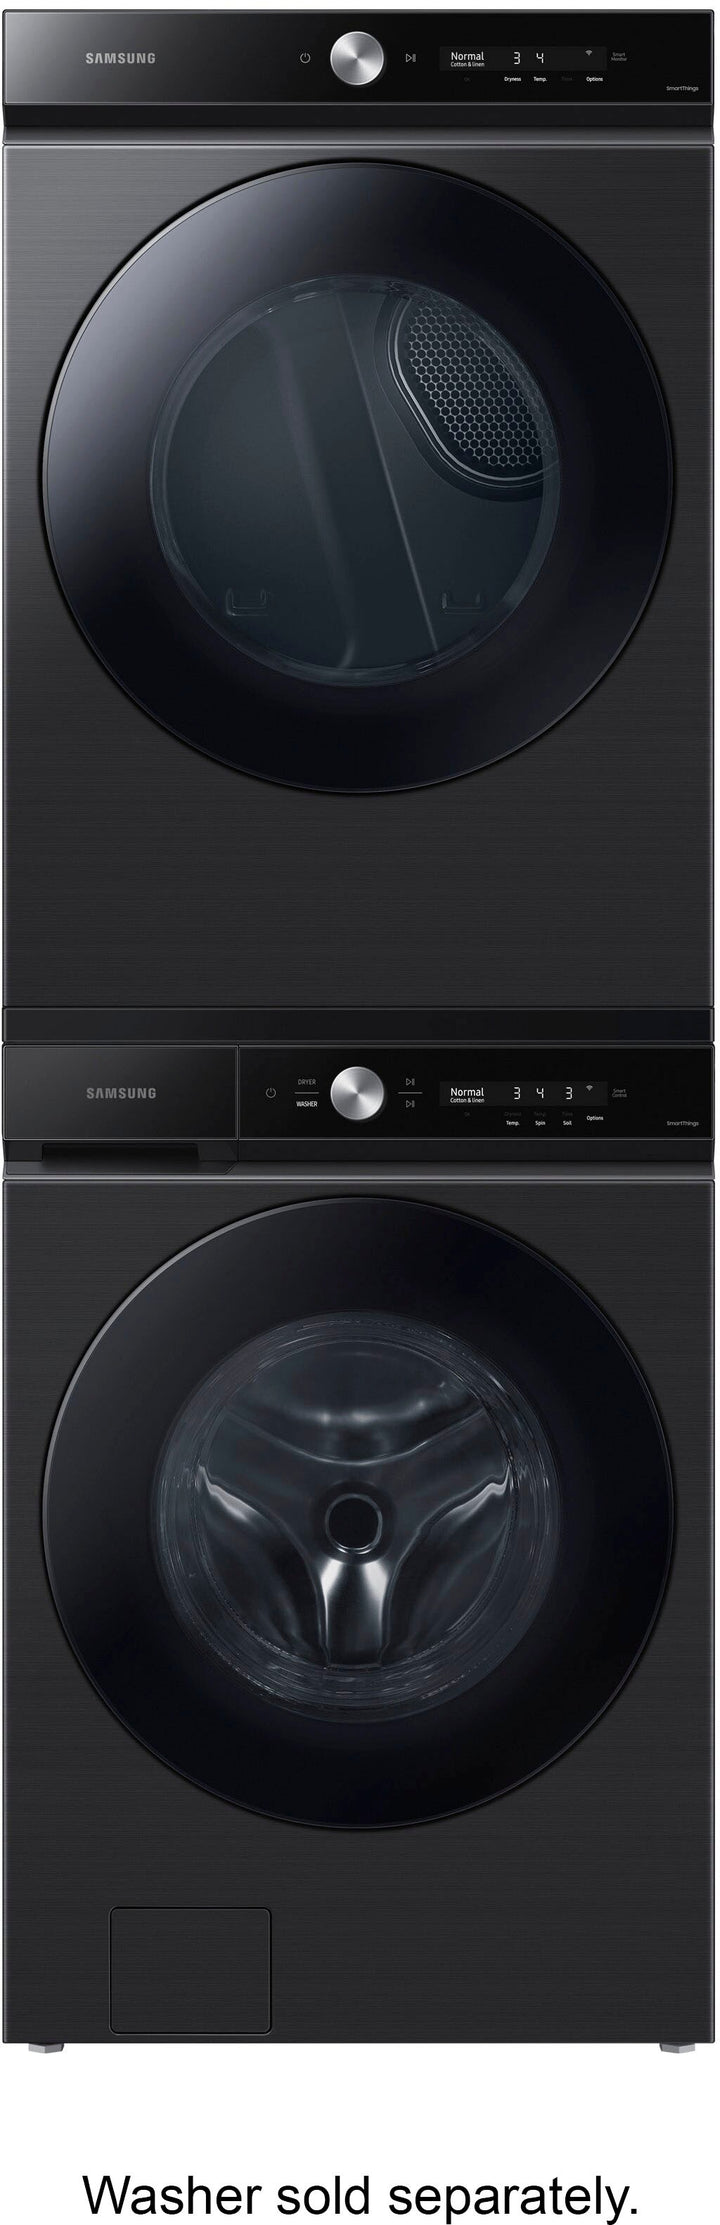 Samsung - Bespoke 7.6 cu. ft. Ultra Capacity Gas Dryer with Super Speed Dry and AI Smart Dial - Brushed black_10